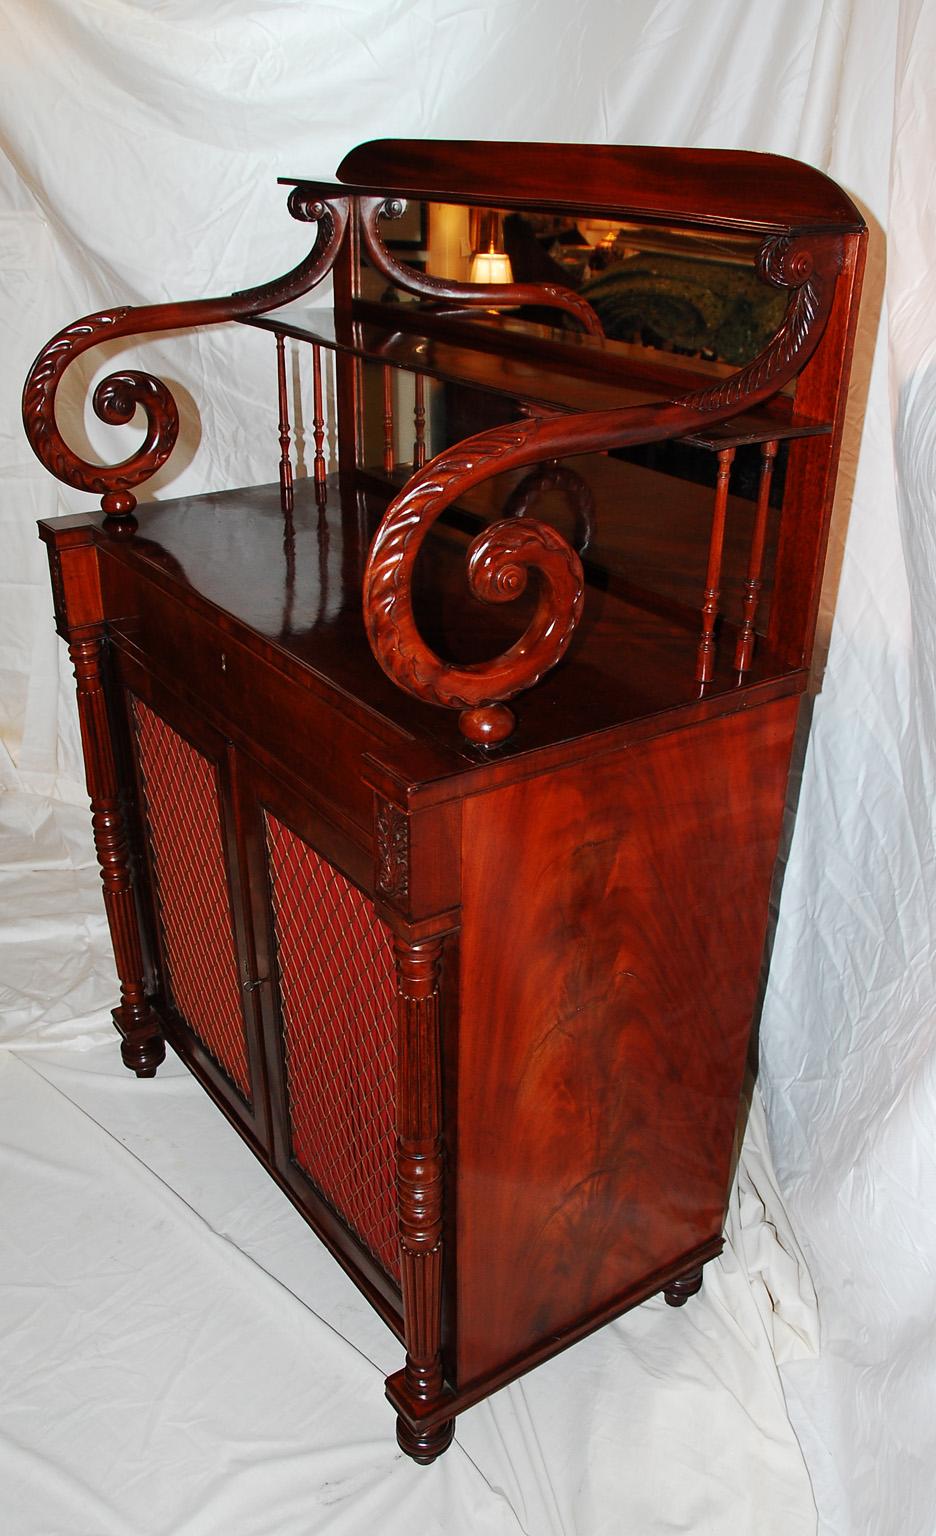 English Regency Mahogany Chiffonier Carved Columns and Scrolls, Mirrored Back In Good Condition For Sale In Wells, ME